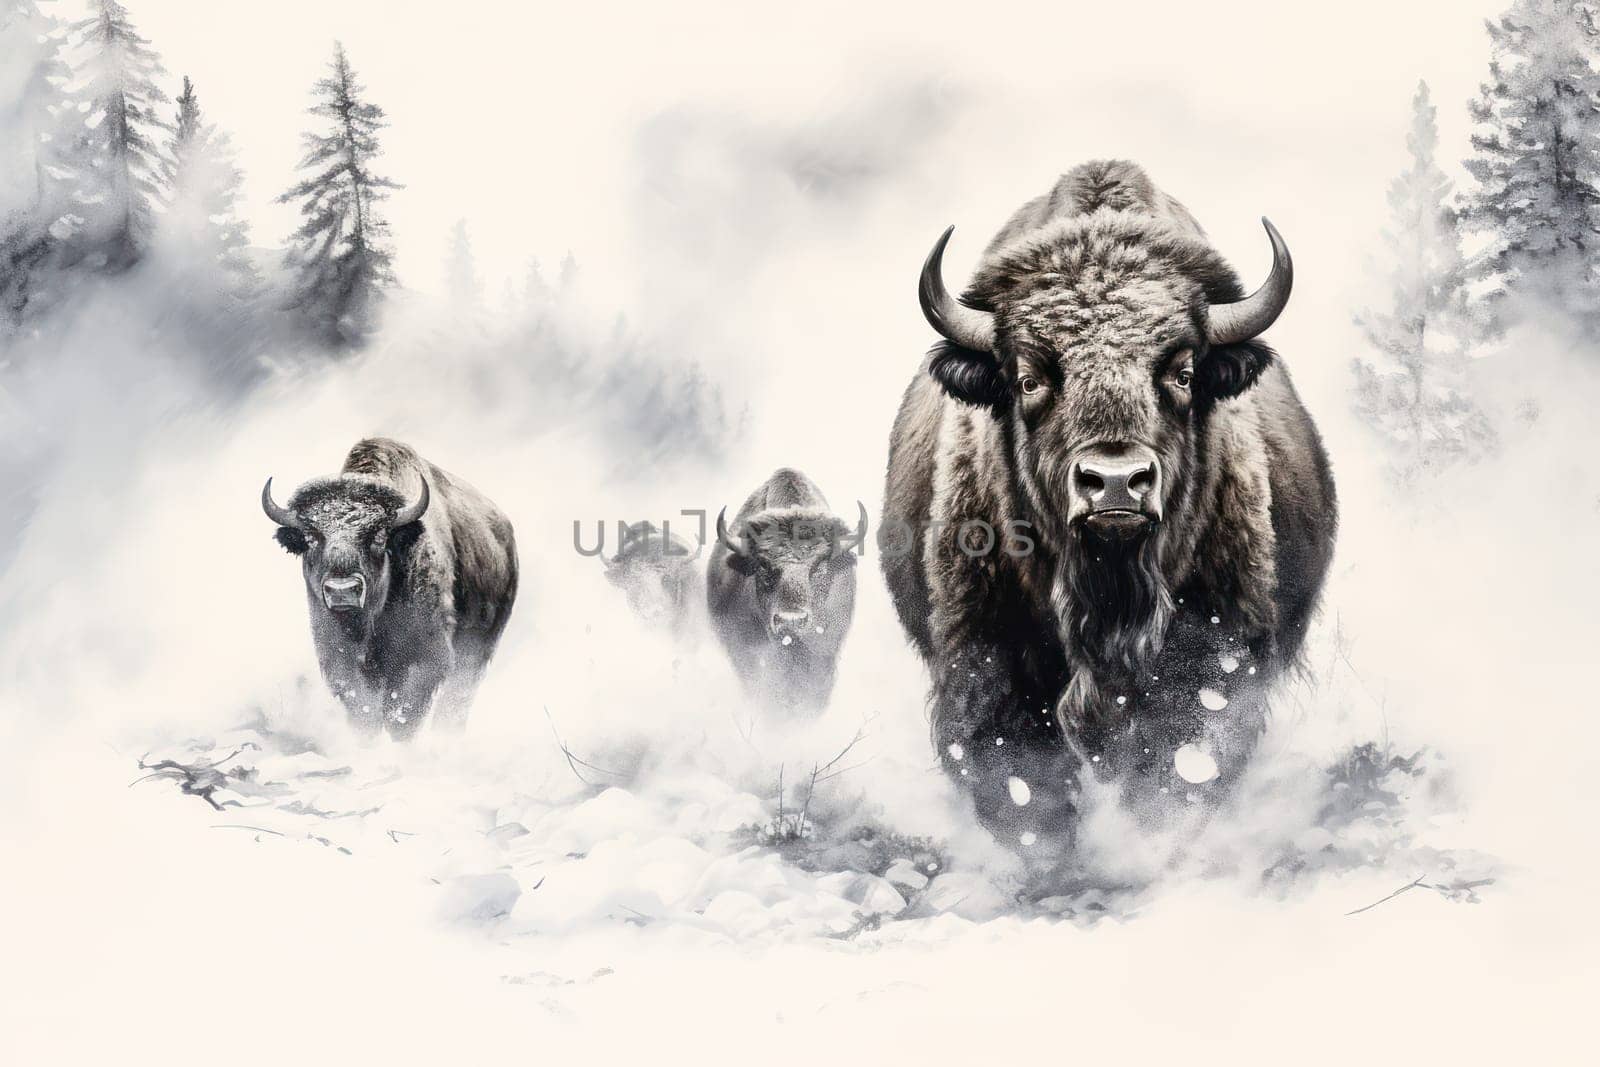 Winter Majesty: A Majestic Group of Bison Grazing in the Snowy Wyoming Wilderness